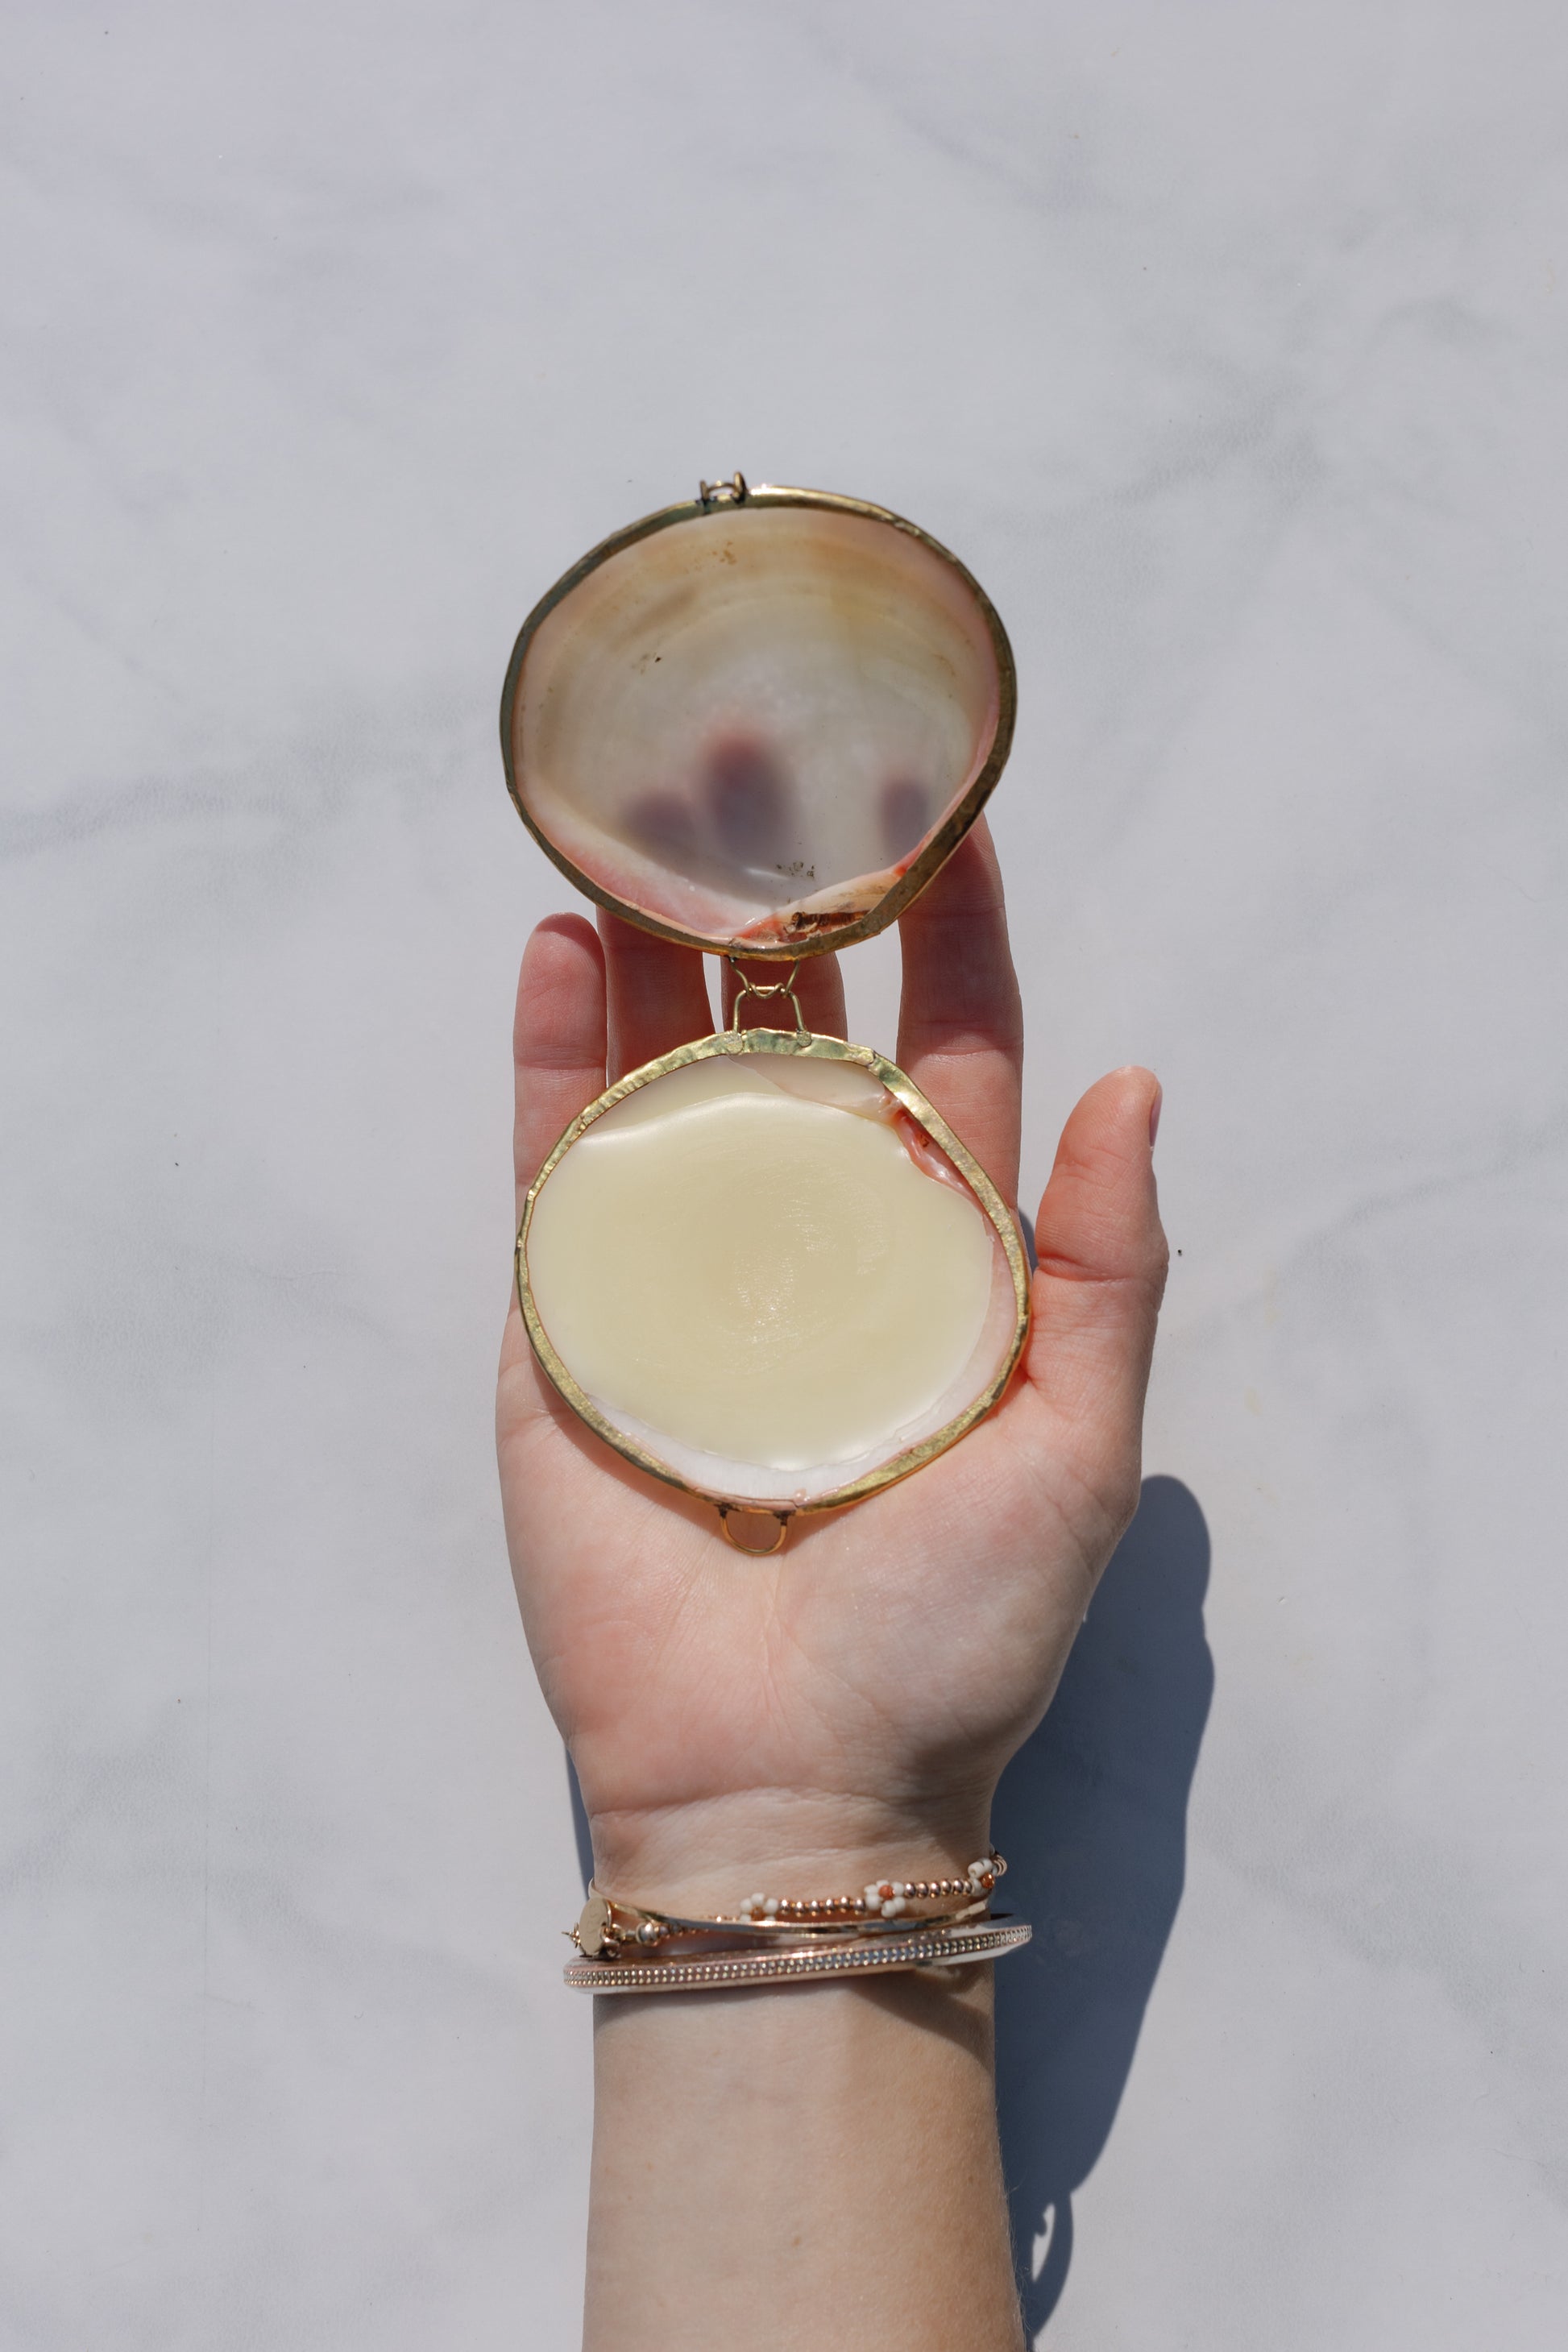 A hand holding the hydrating botanical balm packed in a small container in form of a sea shell